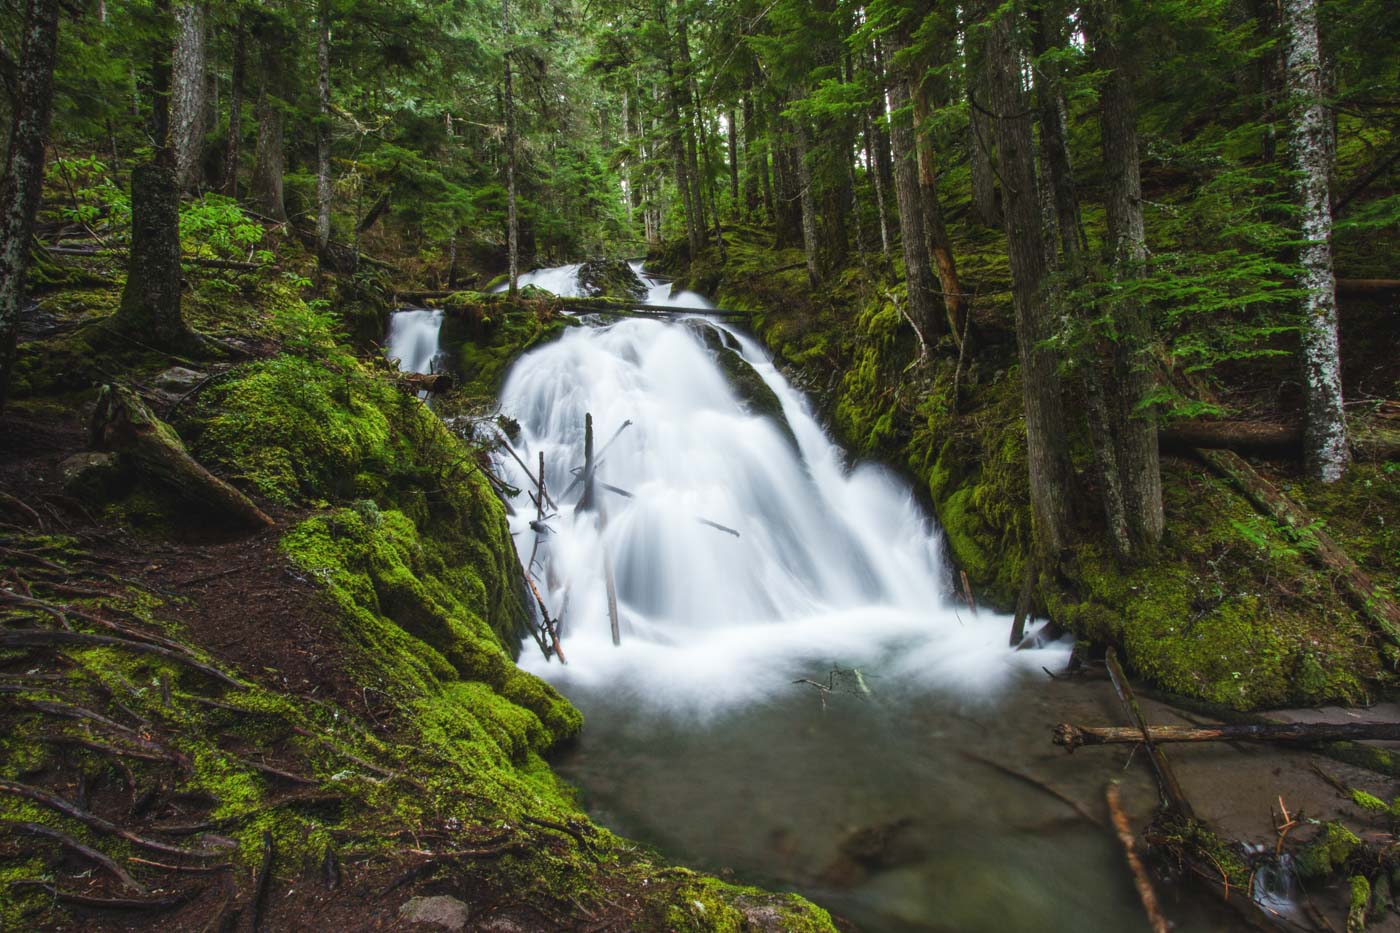 A long exposure of Little Zigzag Falls cascading down over rocks in the middle of a vibrant green jungle in Mt. Hood.